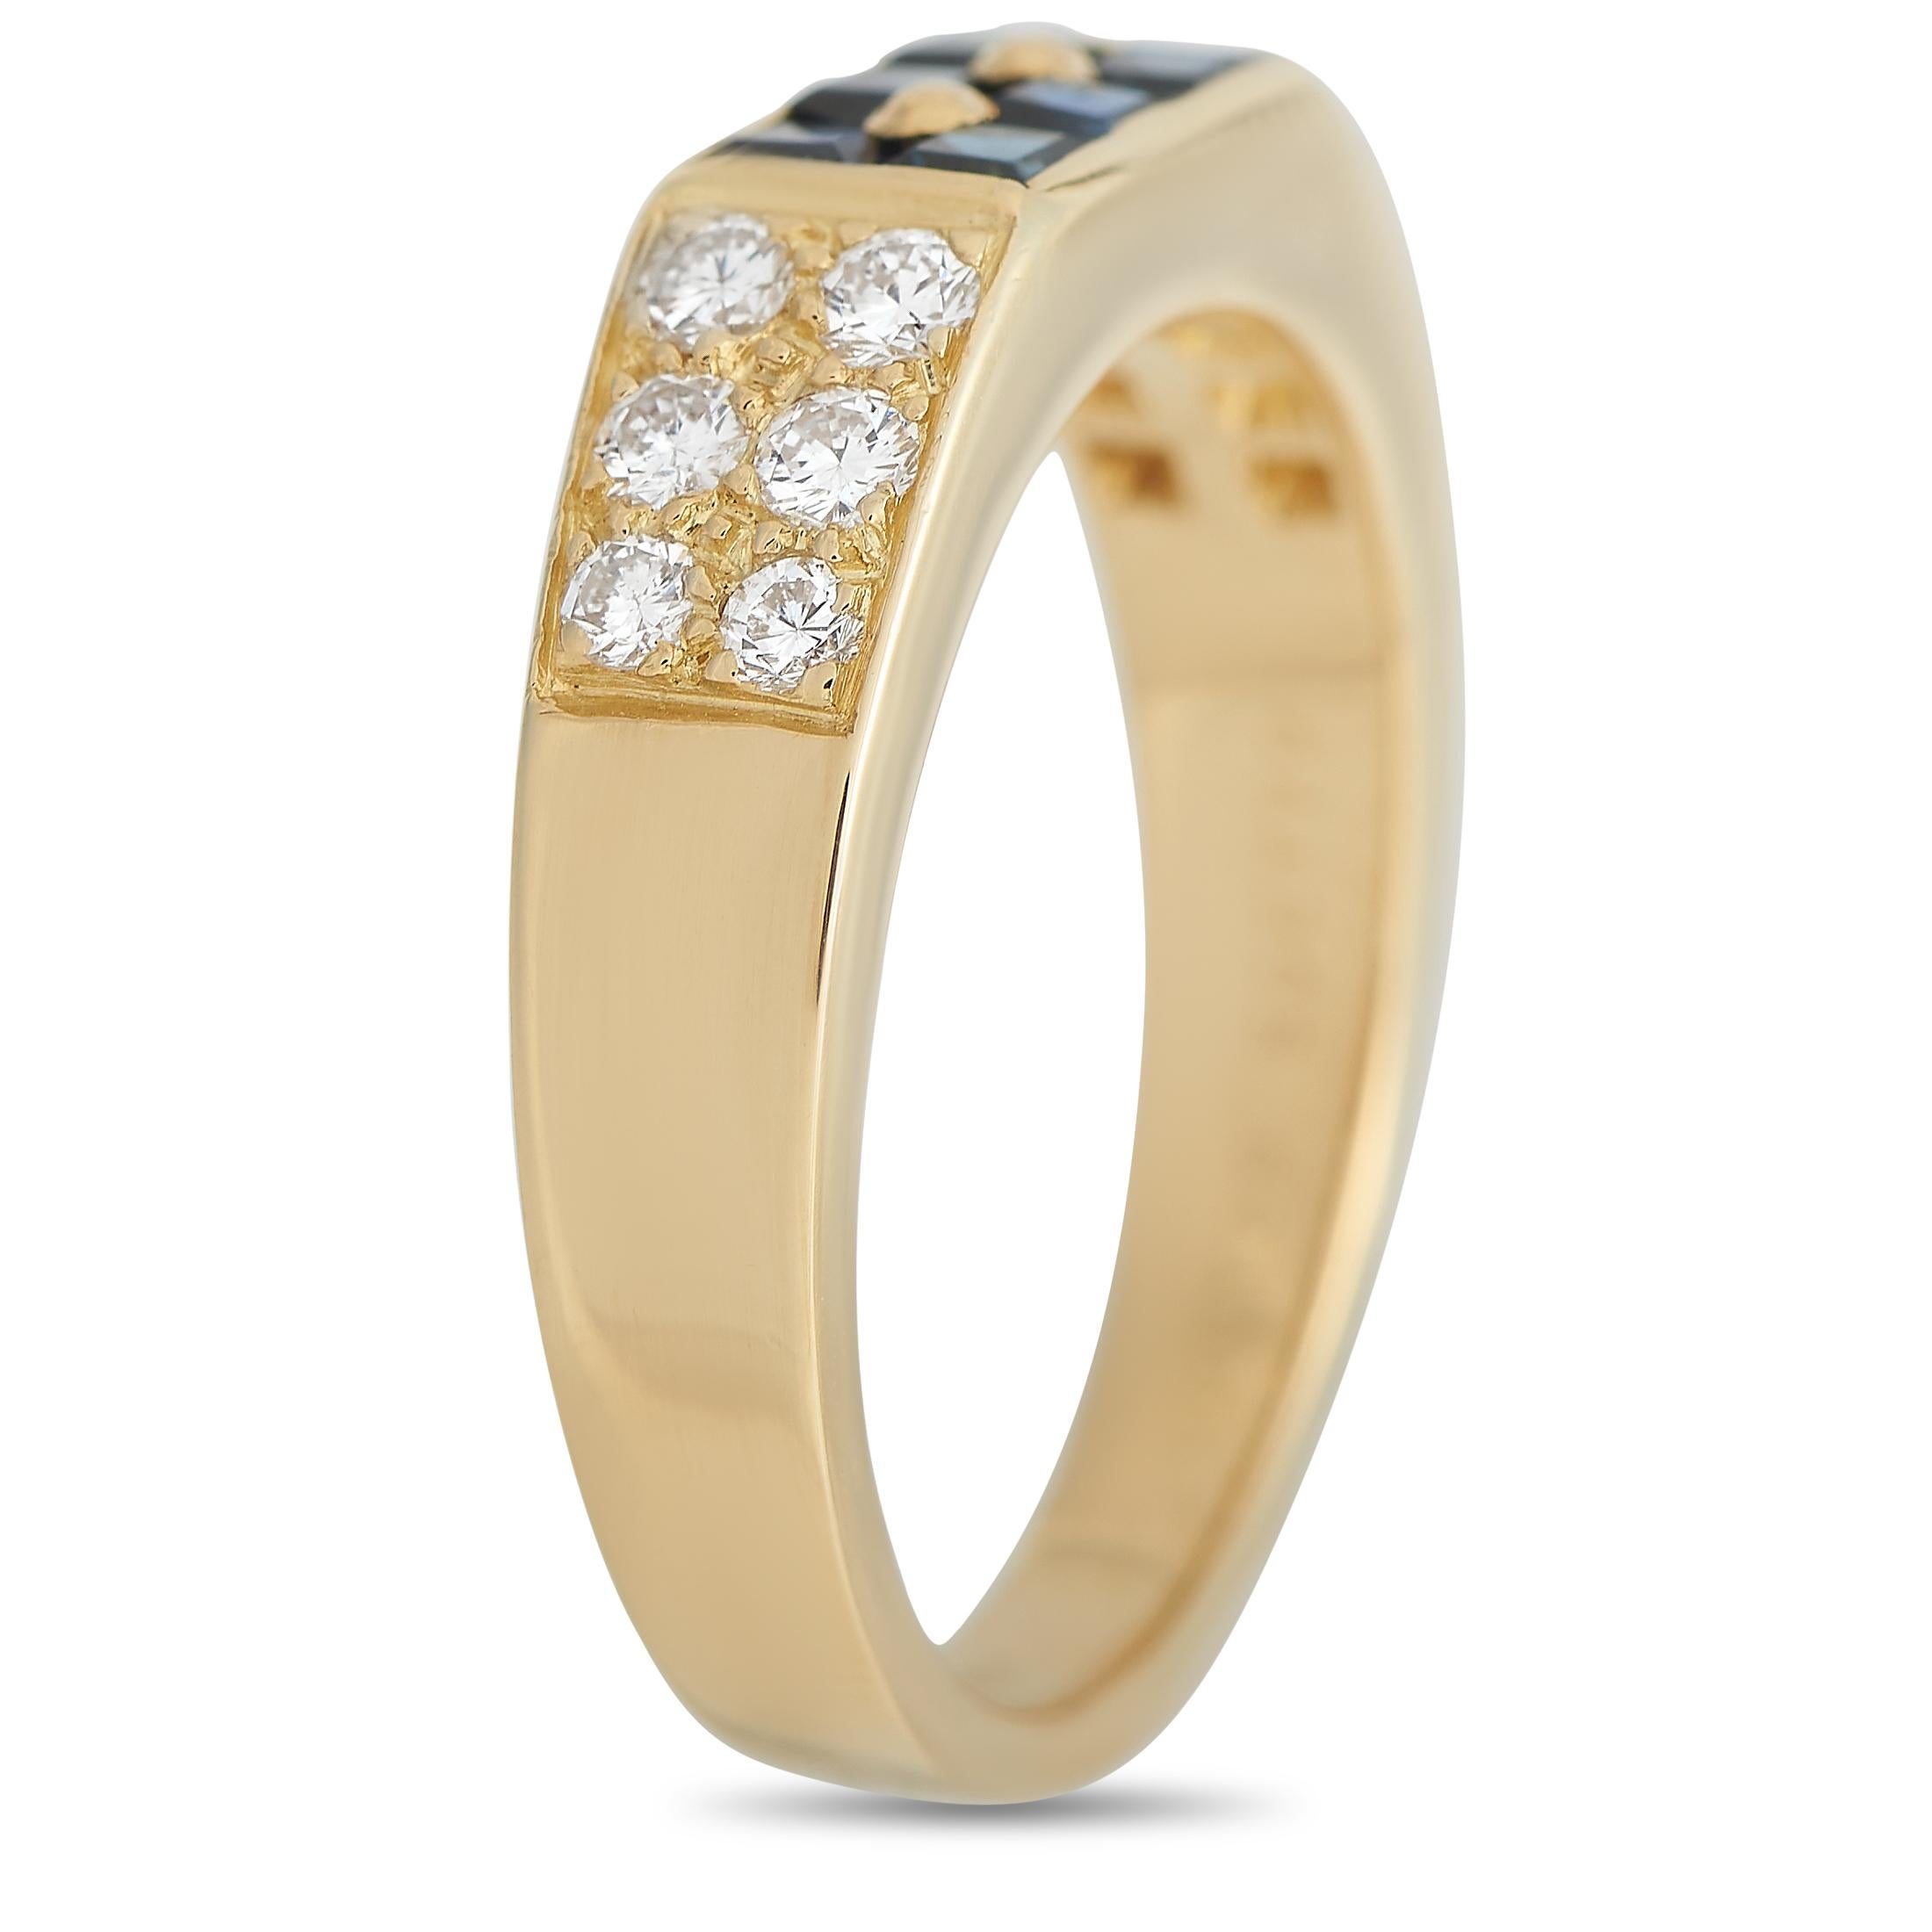 Trust us when we say this ring deserves a place in your jewelry box. A lovely creation by Van Cleef & Arpels, this 18K yellow gold ring features a dazzling combination of diamonds and sapphires. The band's shoulders feature two walls set with six